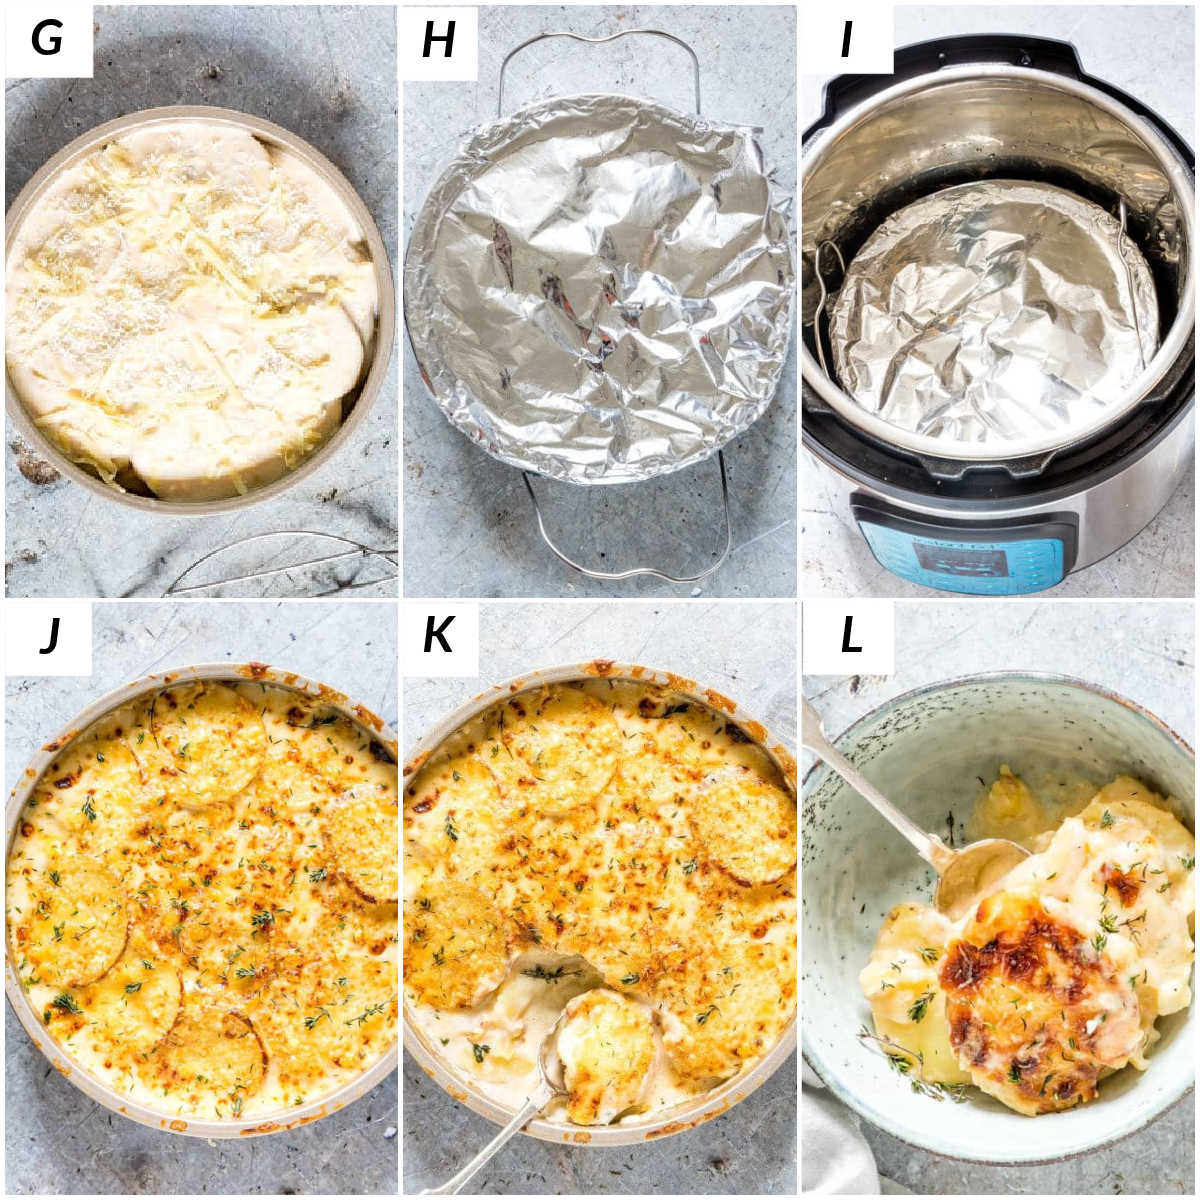 image collage showing the final set of steps for making instant pot scalloped potatoes